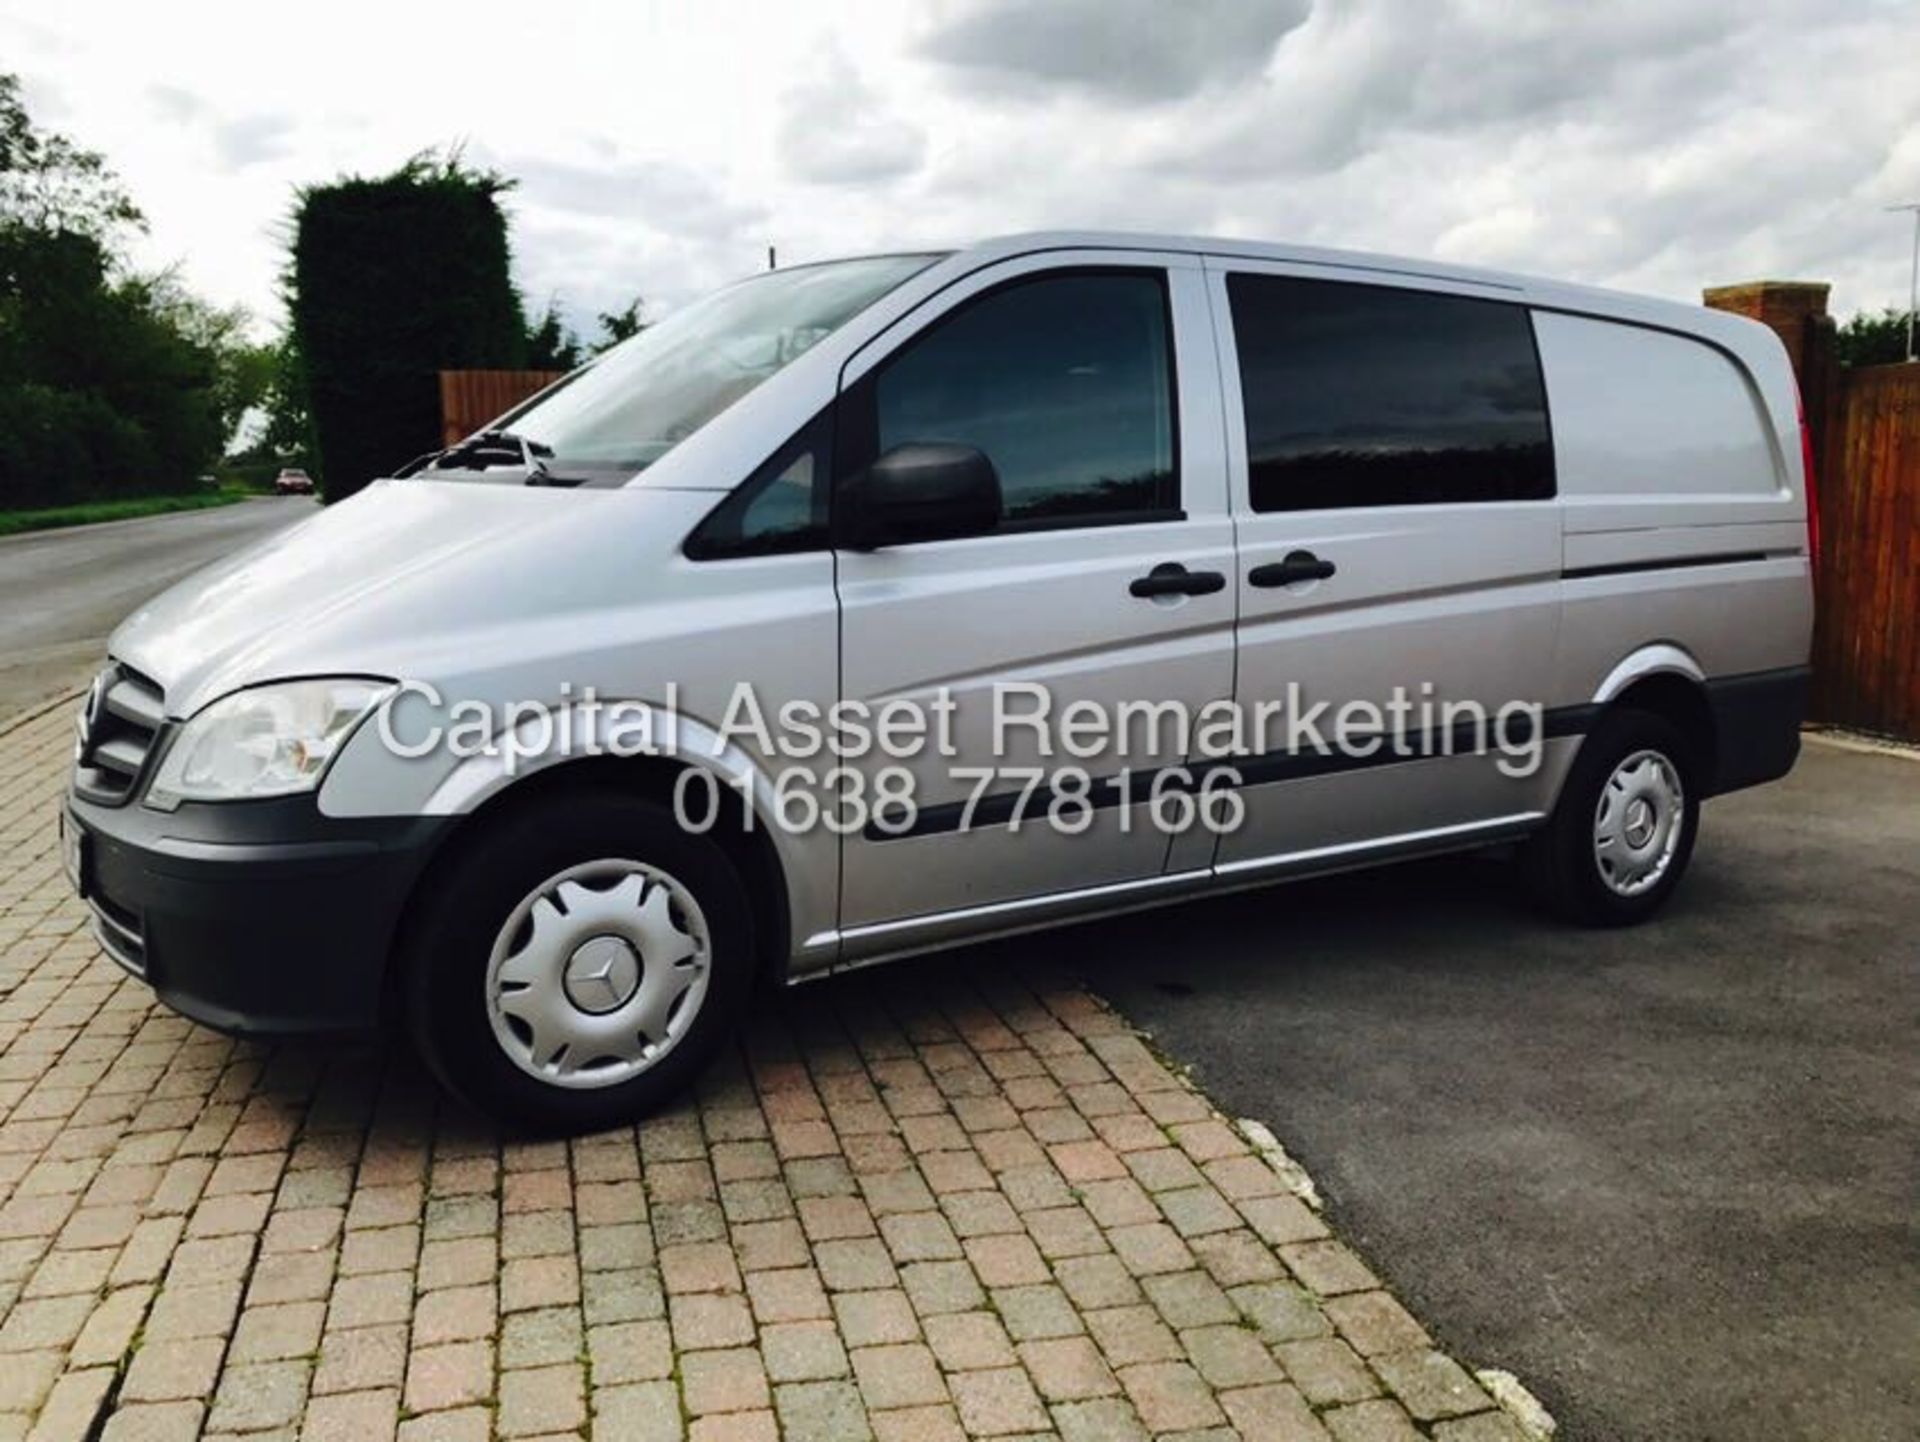 (ON SALE) MERCEDES VITO 113CDI DUELINER / COMBI SPORTY VAN -5 SEATER-60 REG- NEW SHAPE- AIR CON - Image 8 of 24